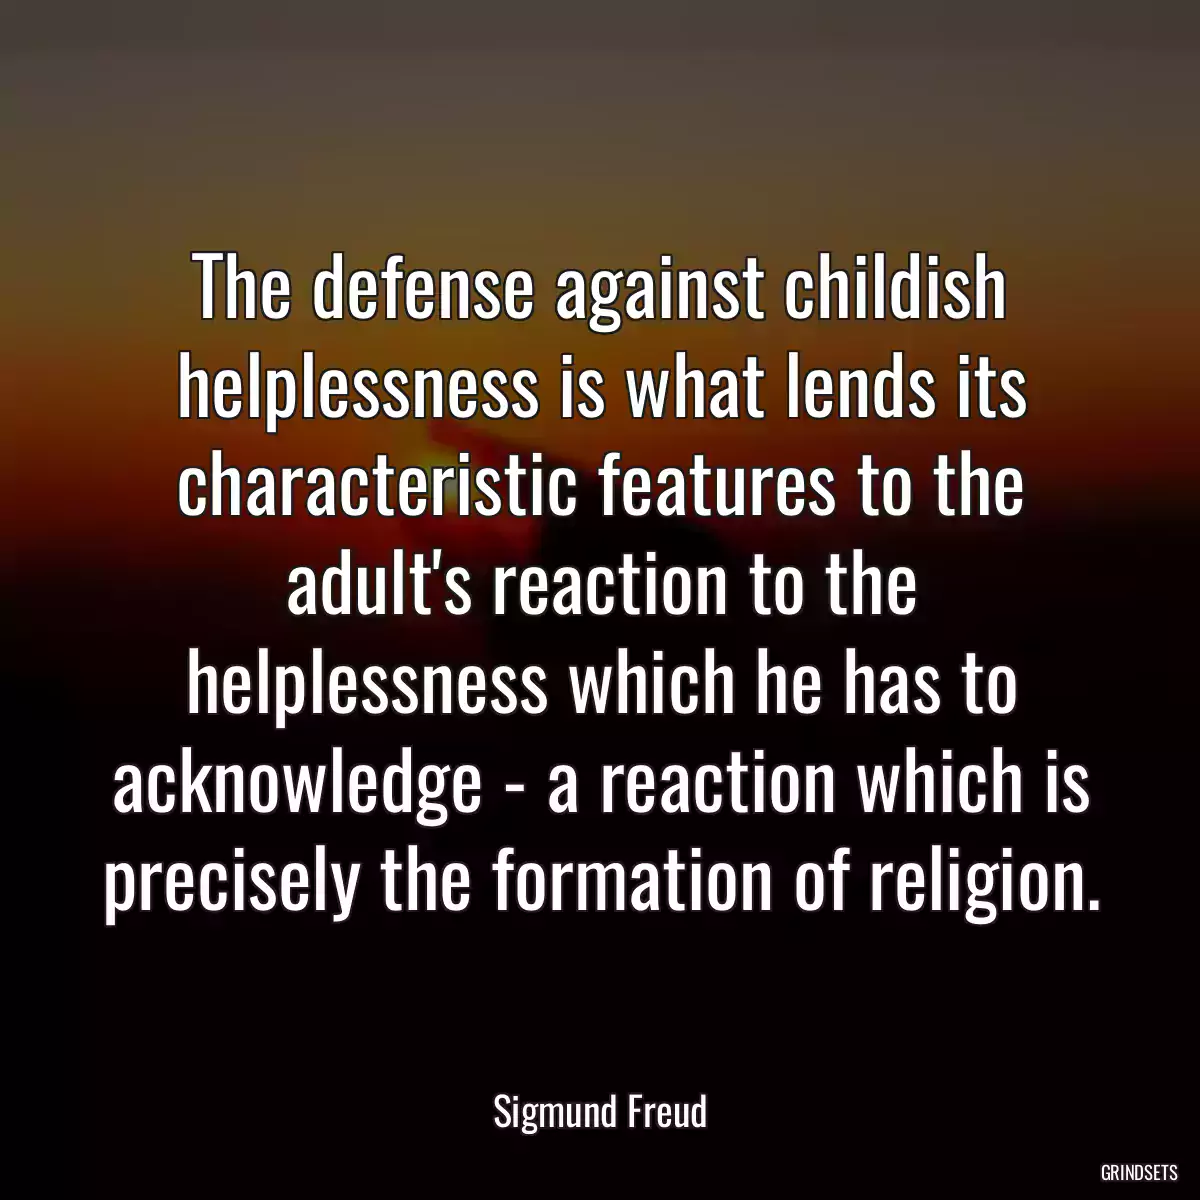 The defense against childish helplessness is what lends its characteristic features to the adult\'s reaction to the helplessness which he has to acknowledge - a reaction which is precisely the formation of religion.